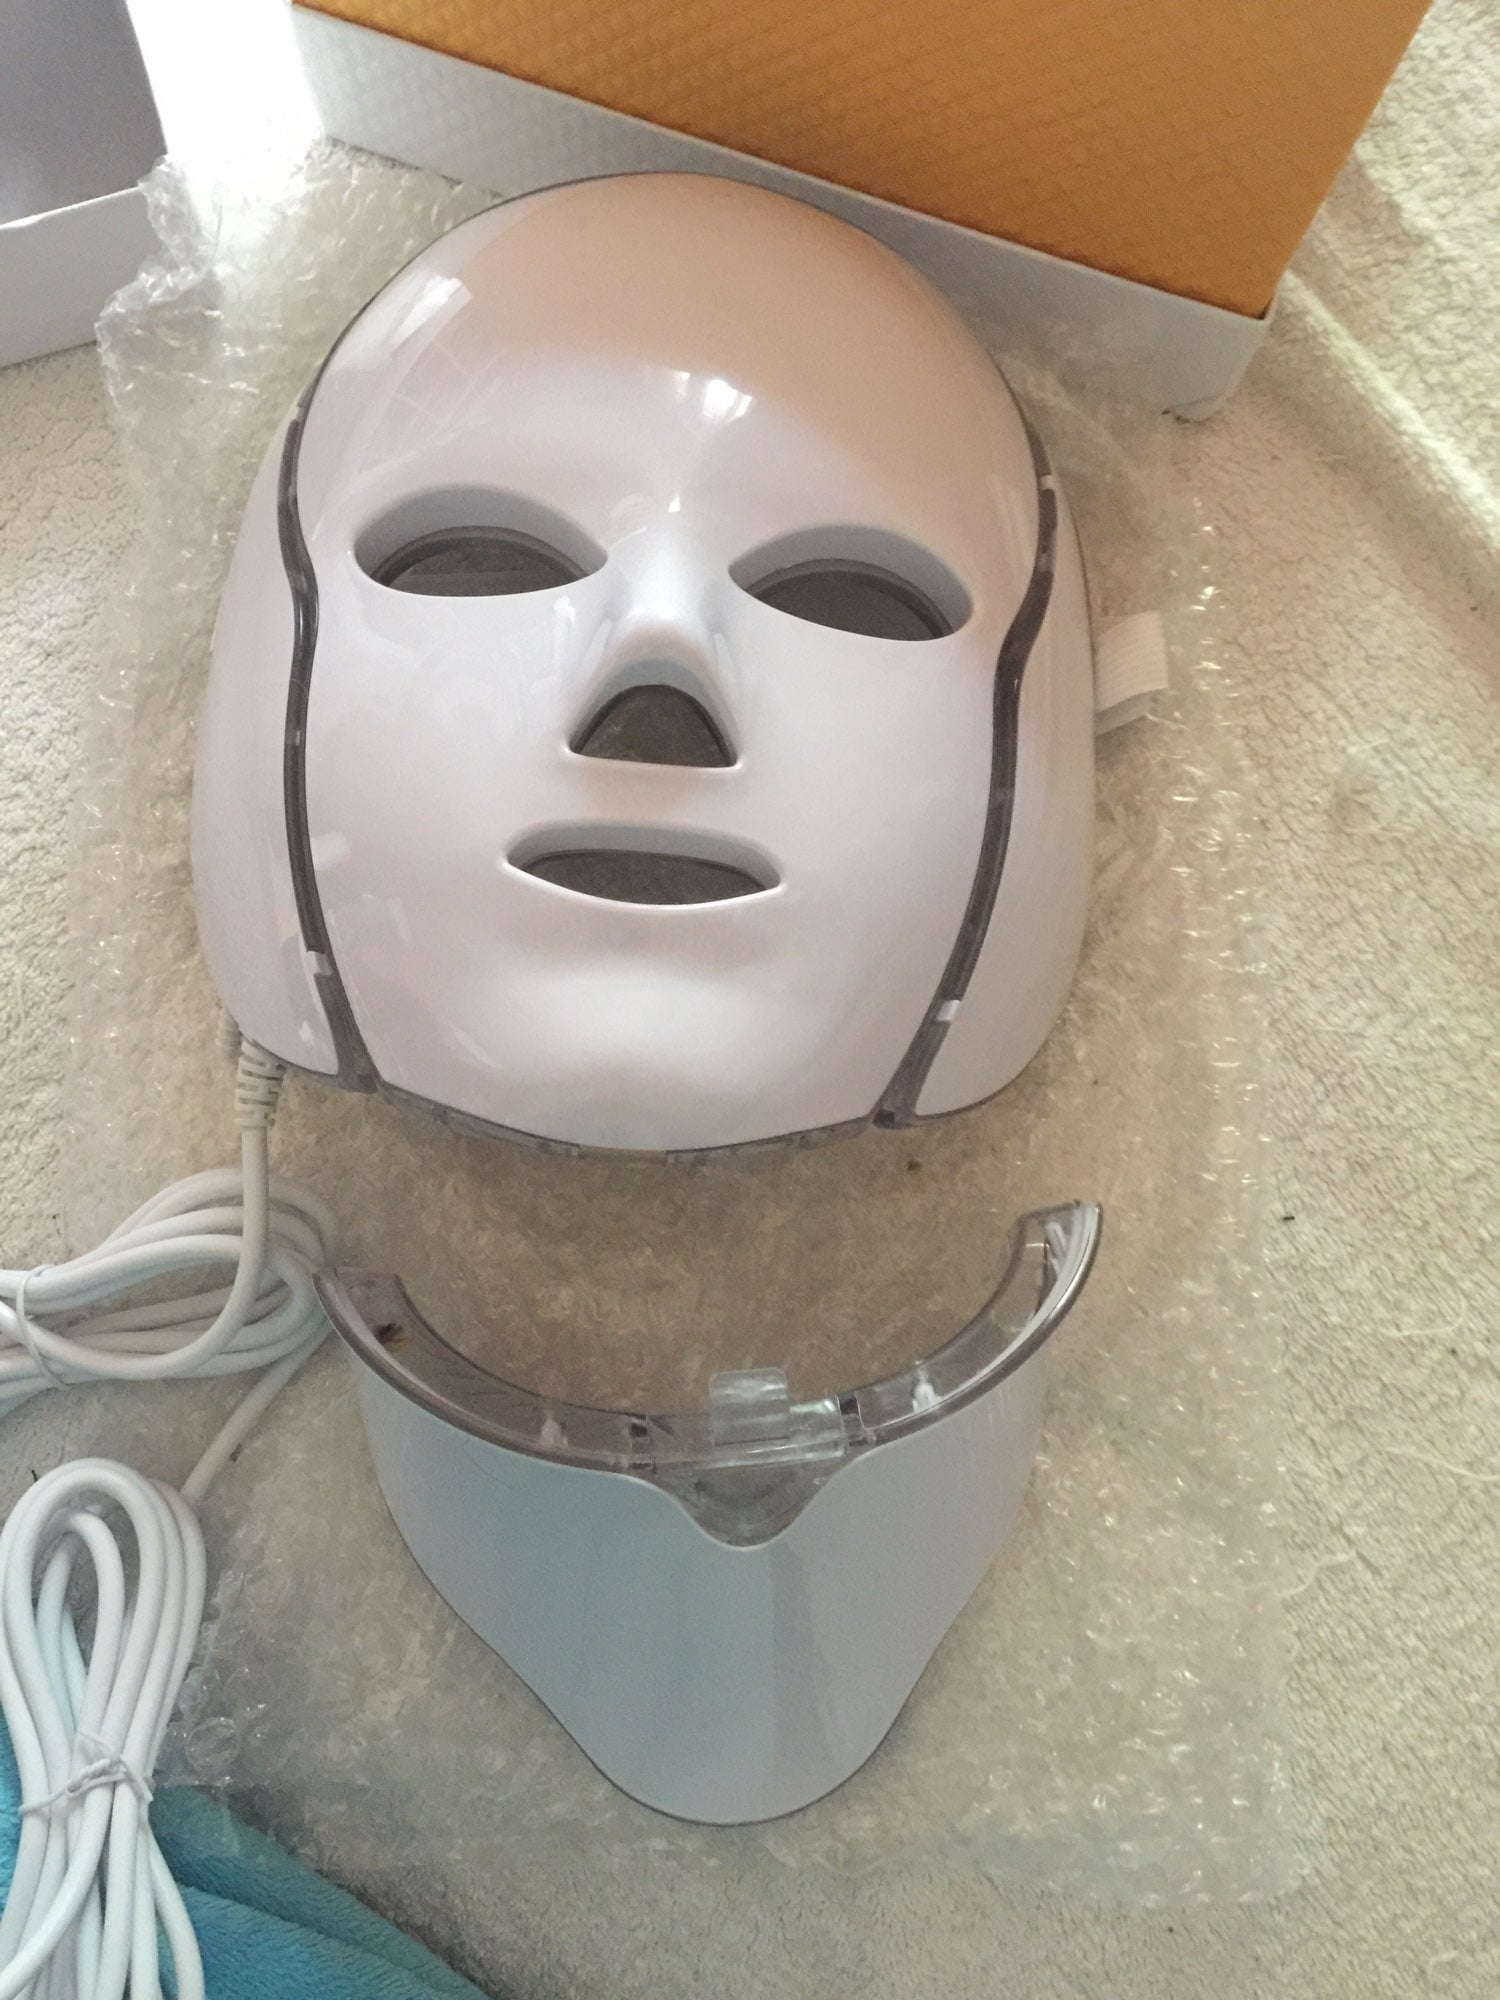 LED Light Therapy Facial Mask - Anti Aging Acne Wrinkles Skin Care Rejuvenation Face Phototherapy Mask photo review